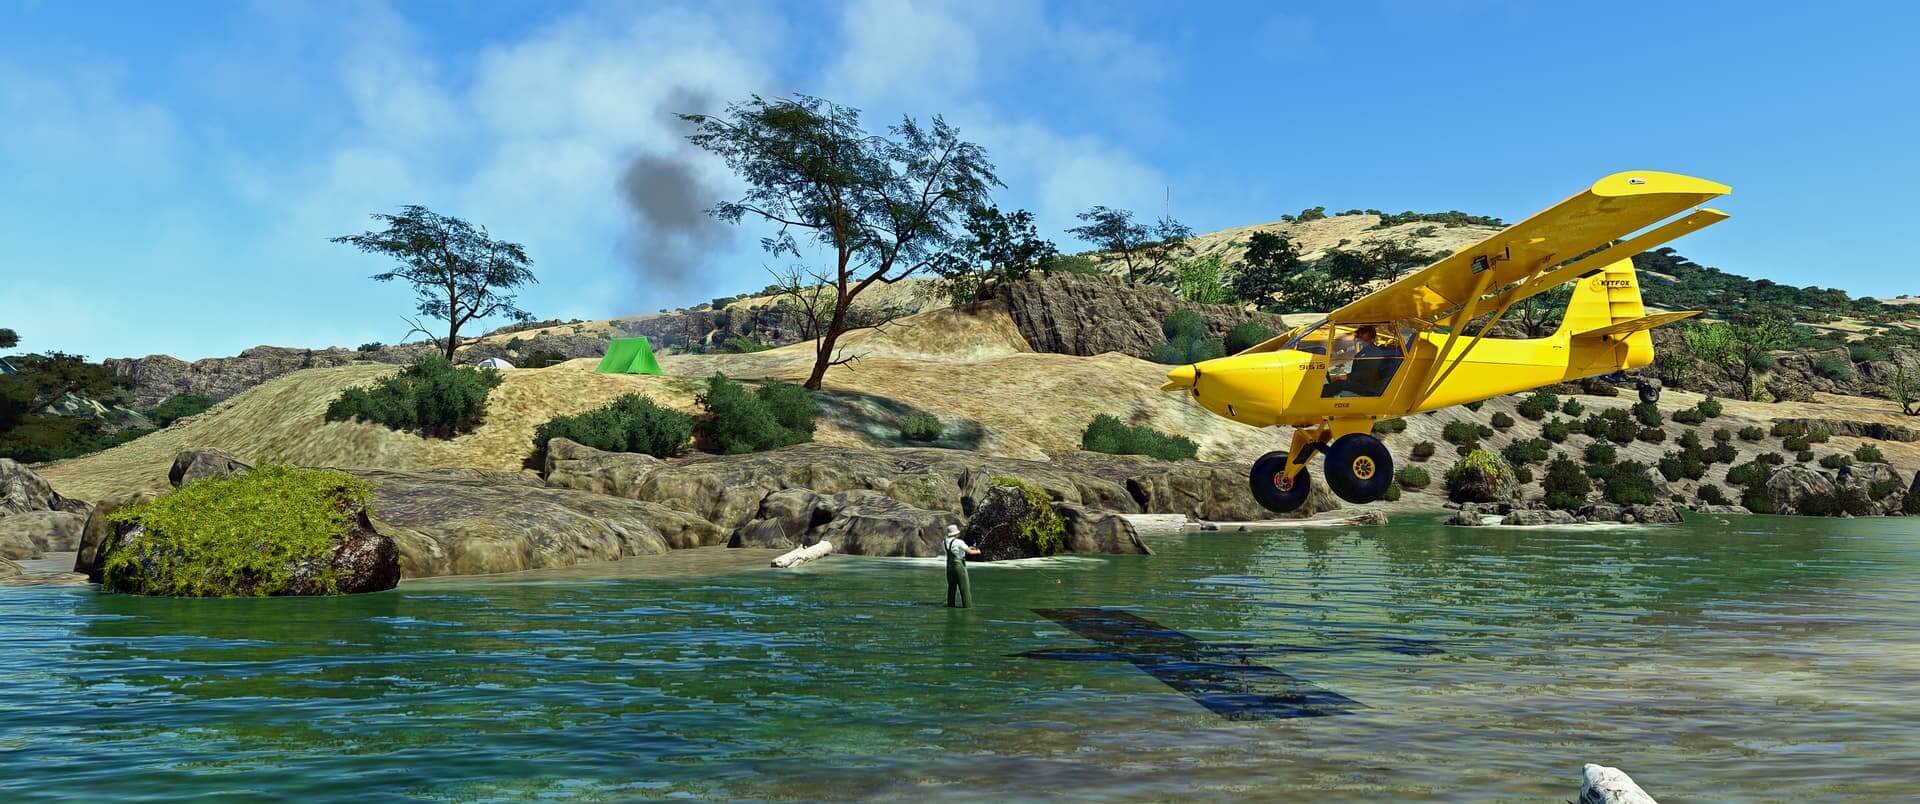 A yellow Kitfox passes very low over water next to a fisherman, who has a camping tent setup on the terrain above.